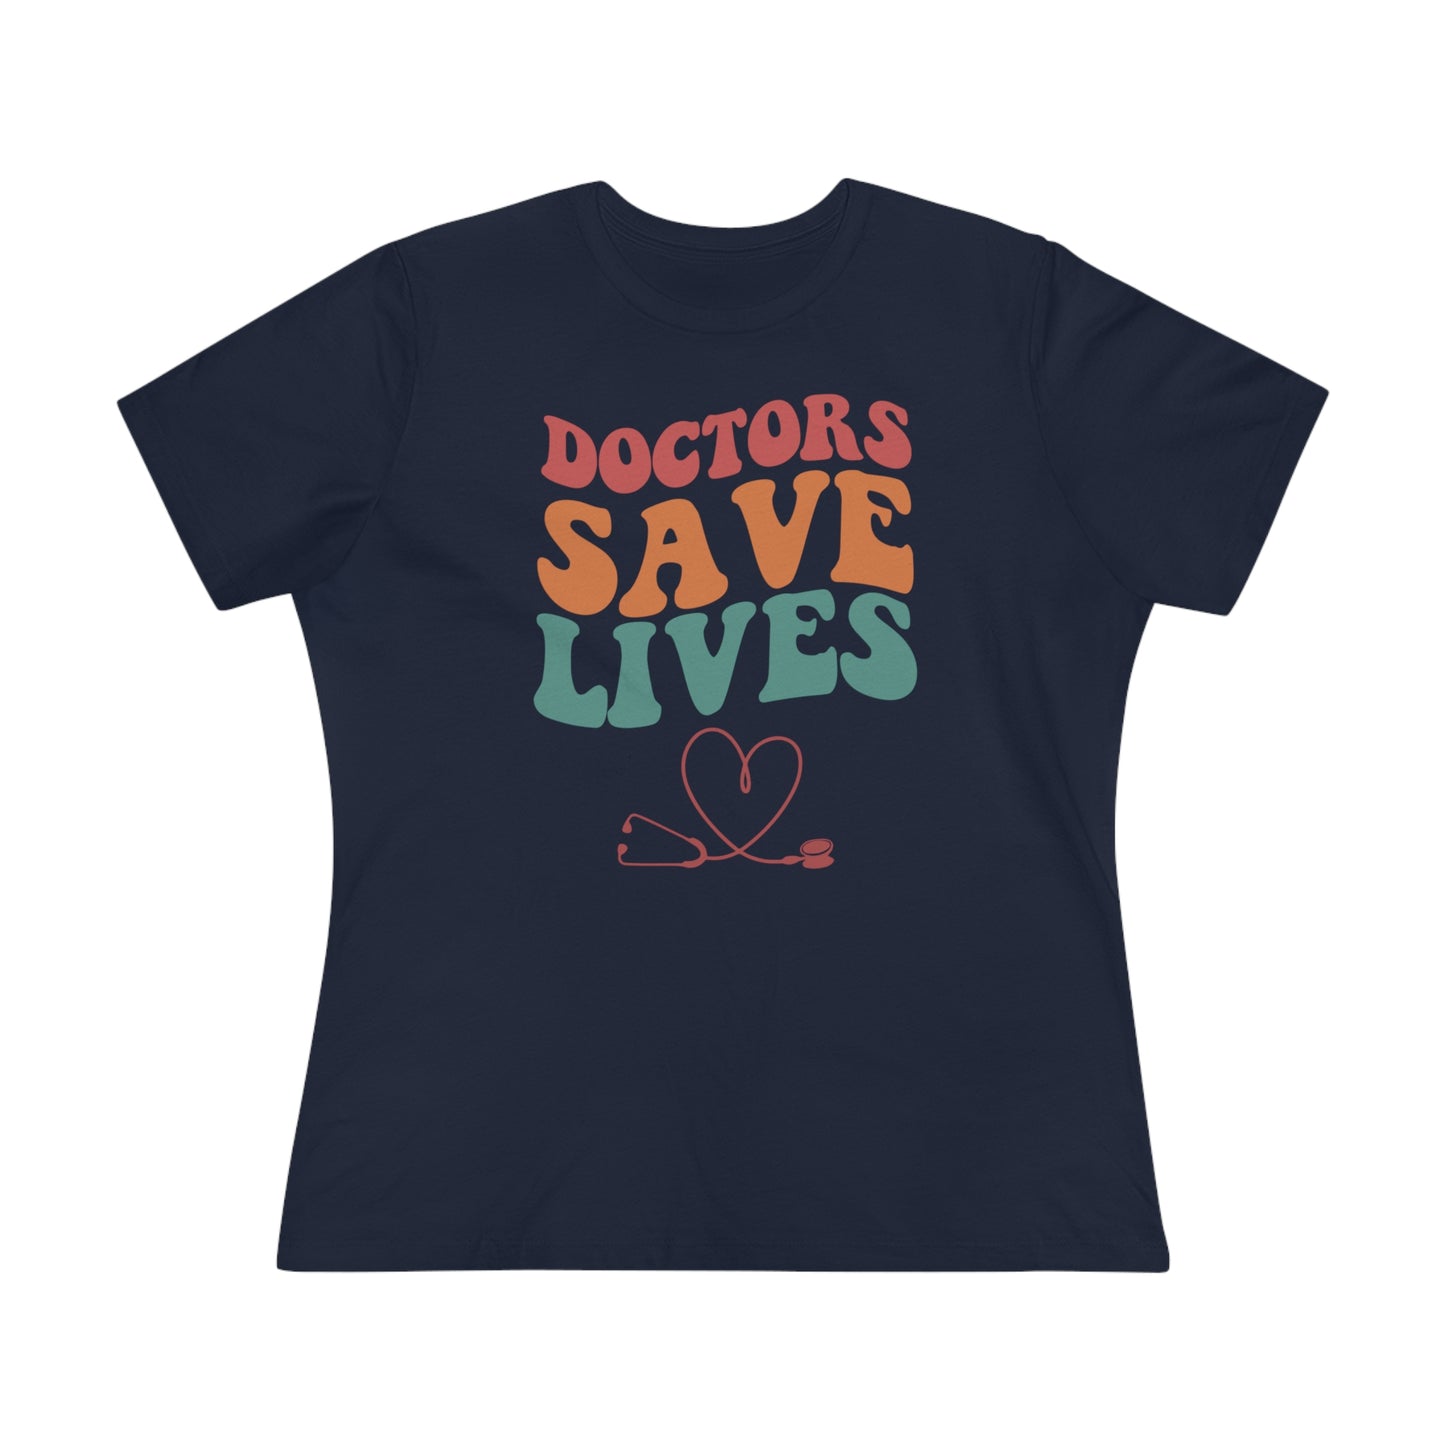 Doctors Save Lives Women's Premium Tee, Doctor shirts, Doctor gift ideas, Future Doctor Shirt, doctors gift, women shirt with doctor design